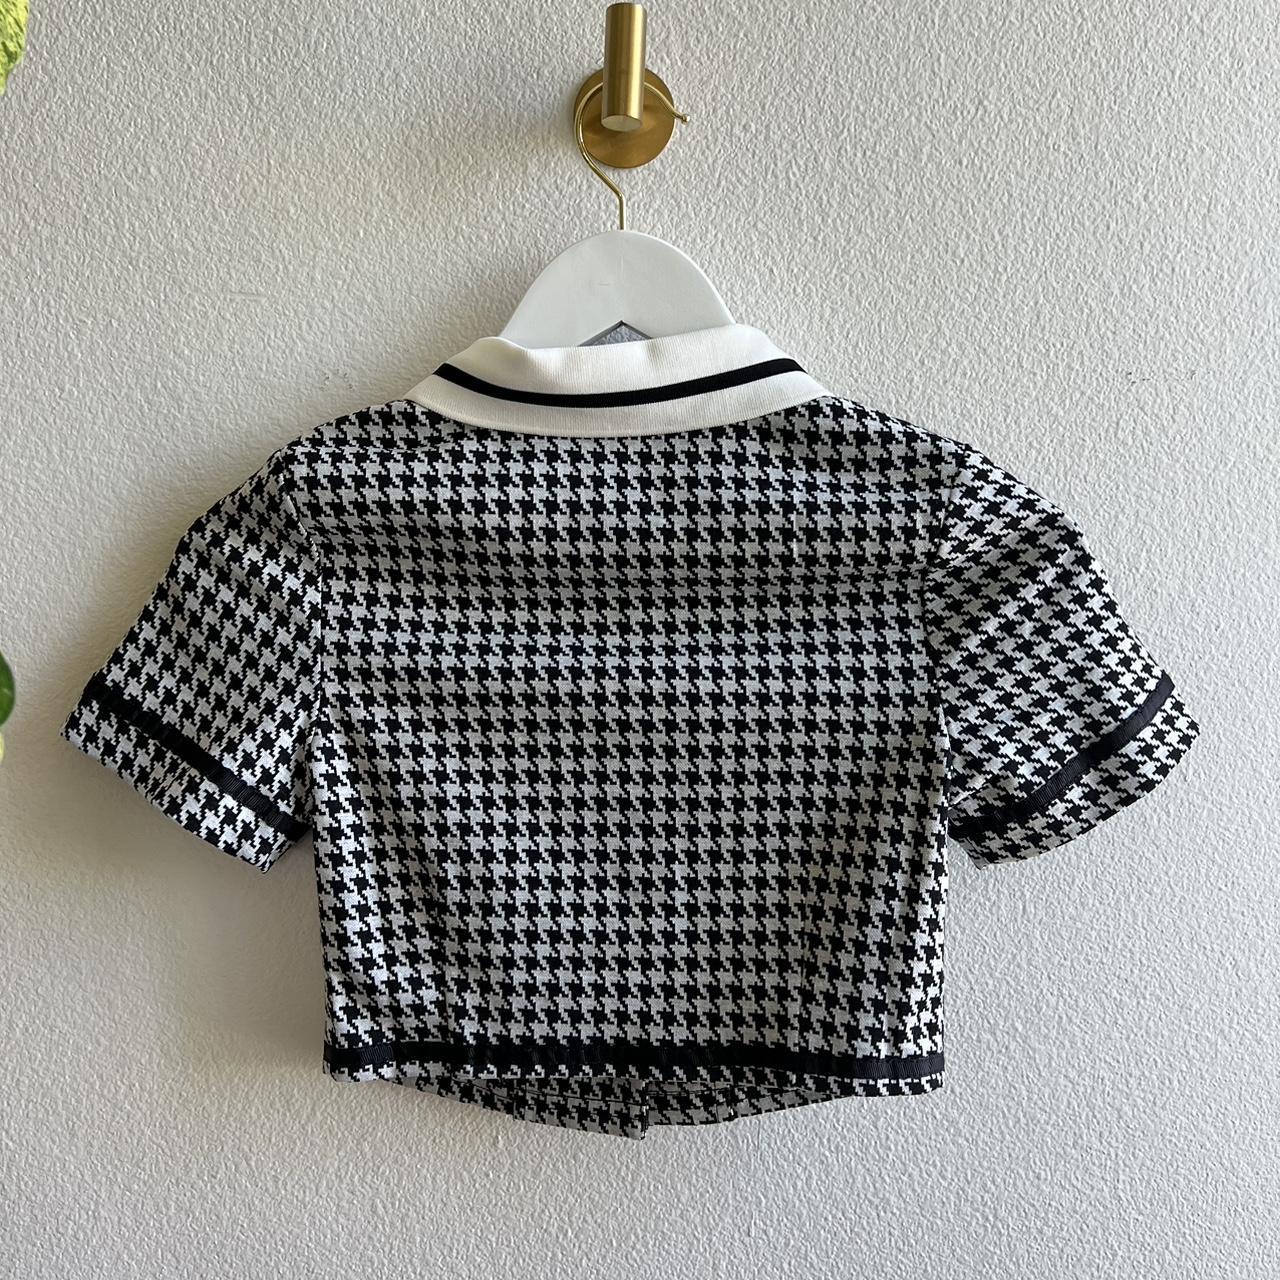 Product Image 4 - Pomelo - Houndstooth Crop Top
Size